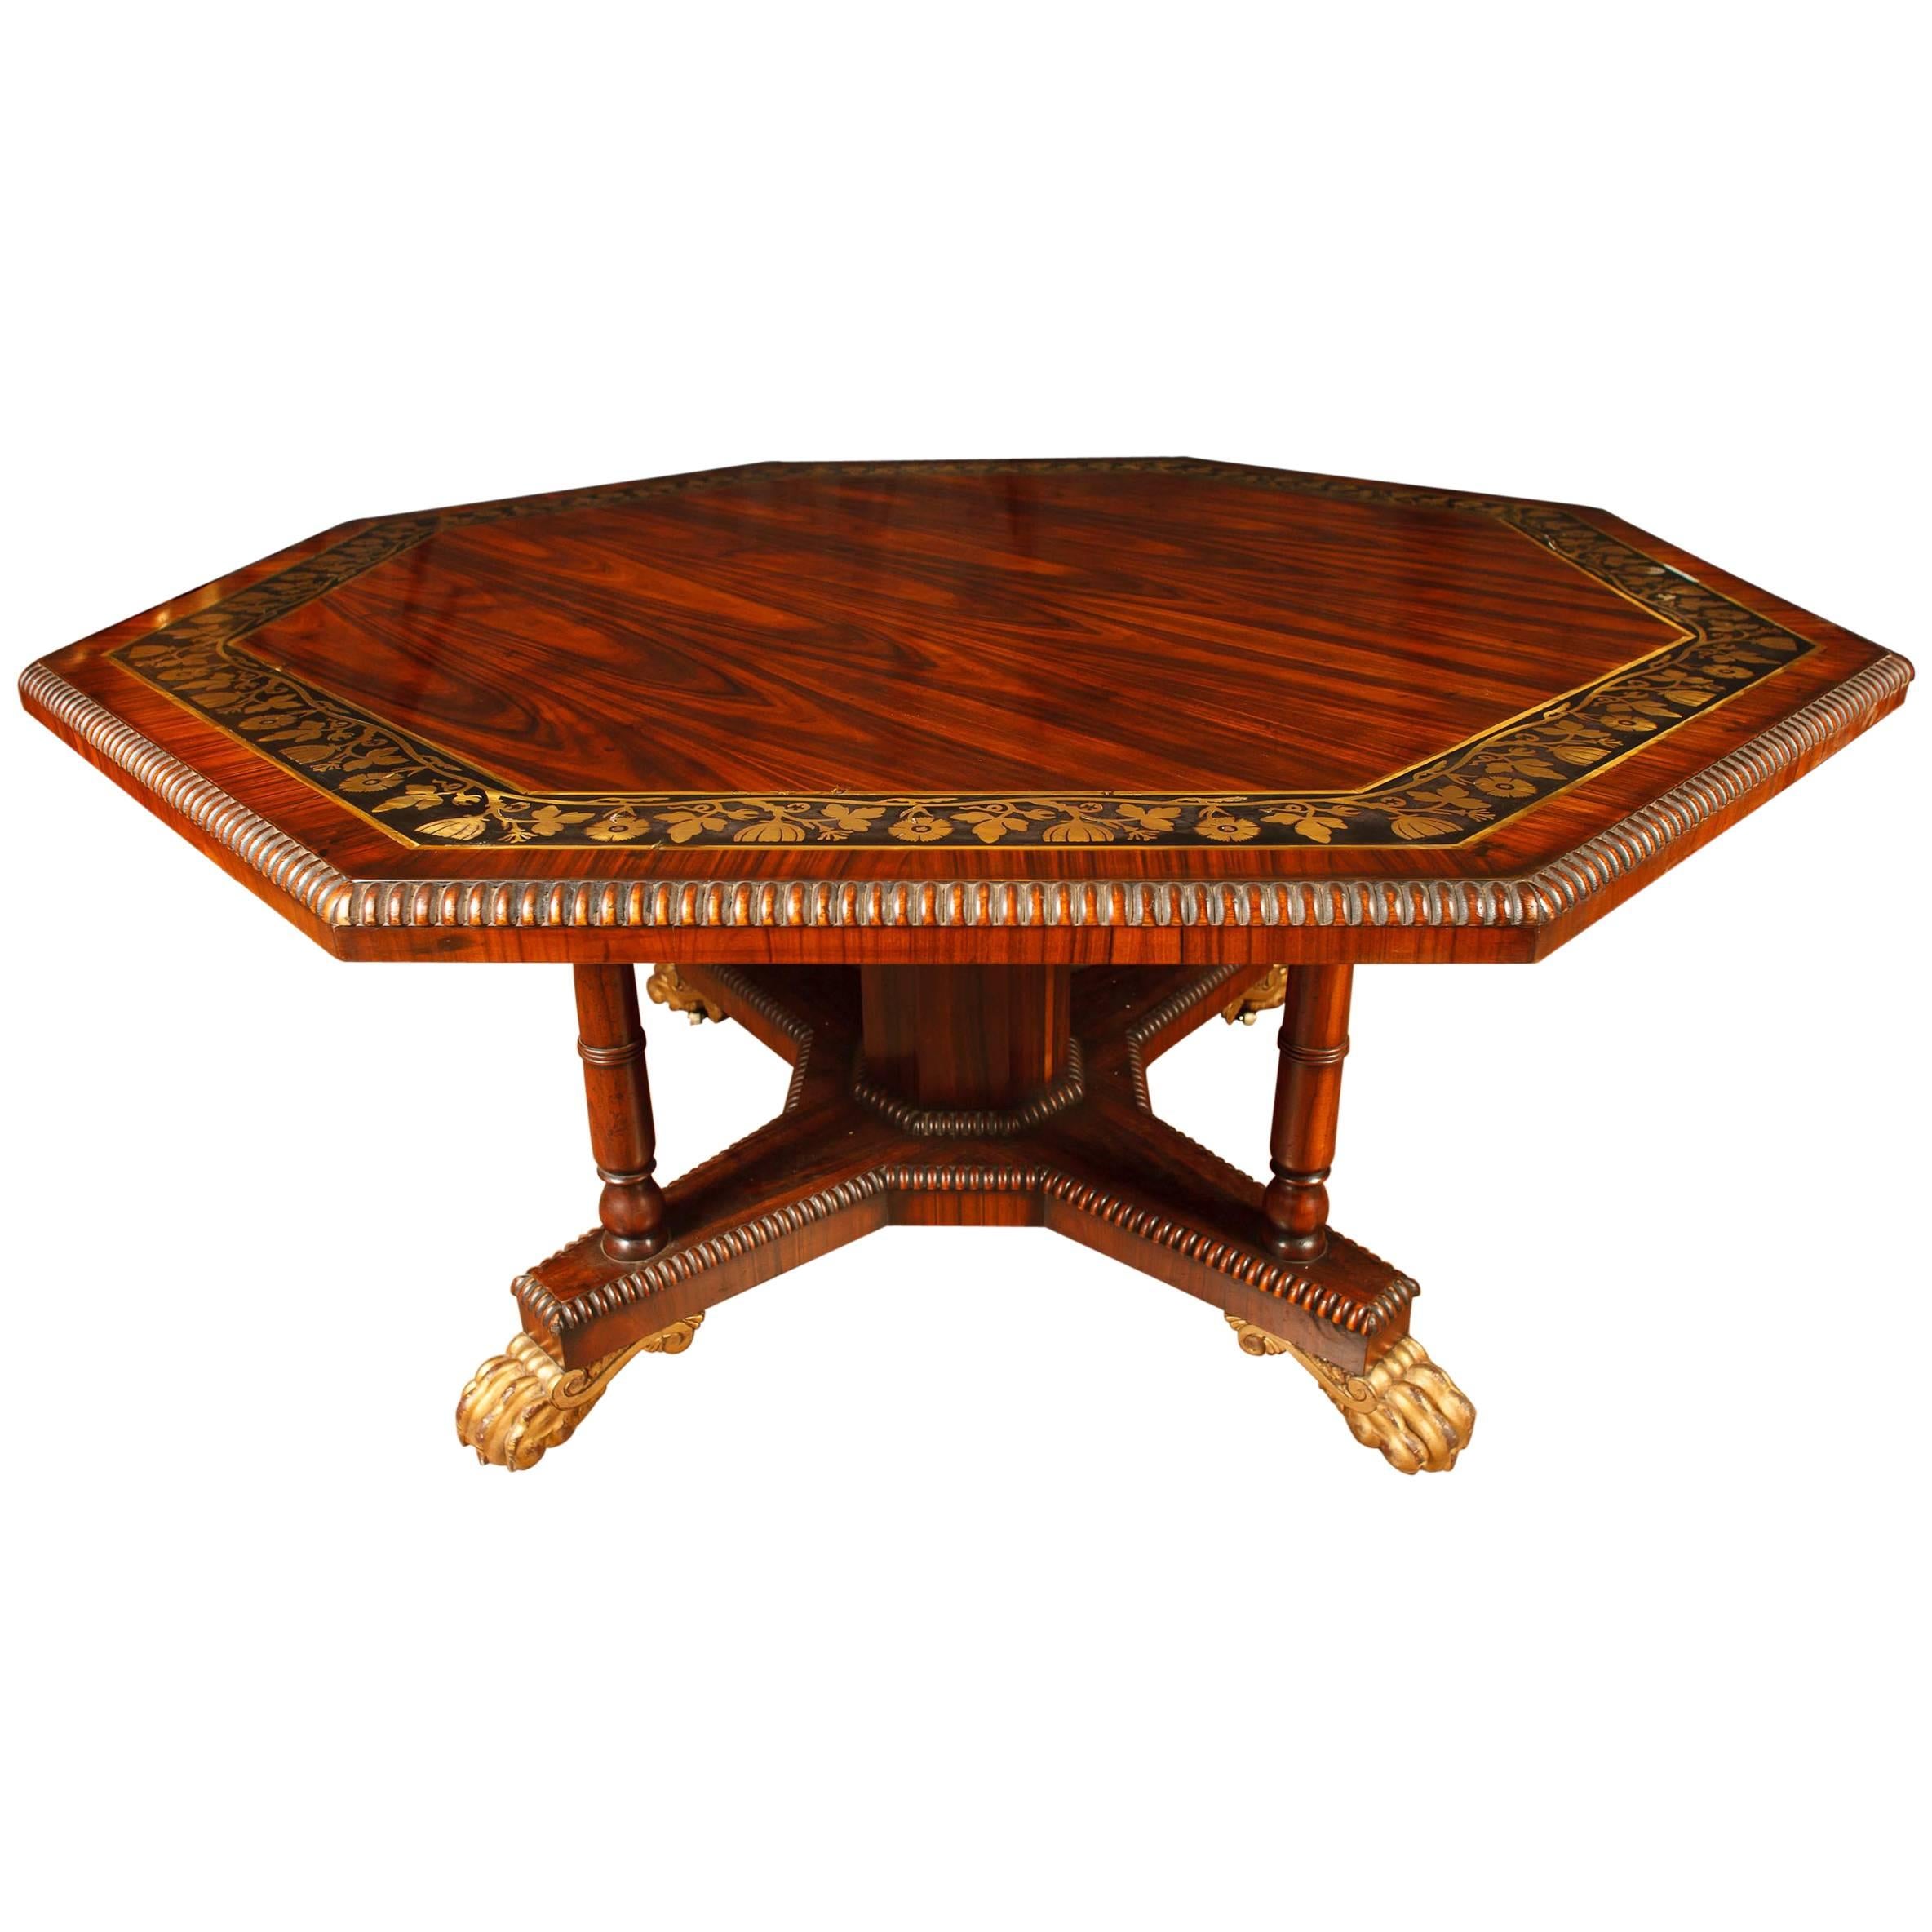 English Regency style Octagonal Centre Table Dining Brass Inlay For Sale